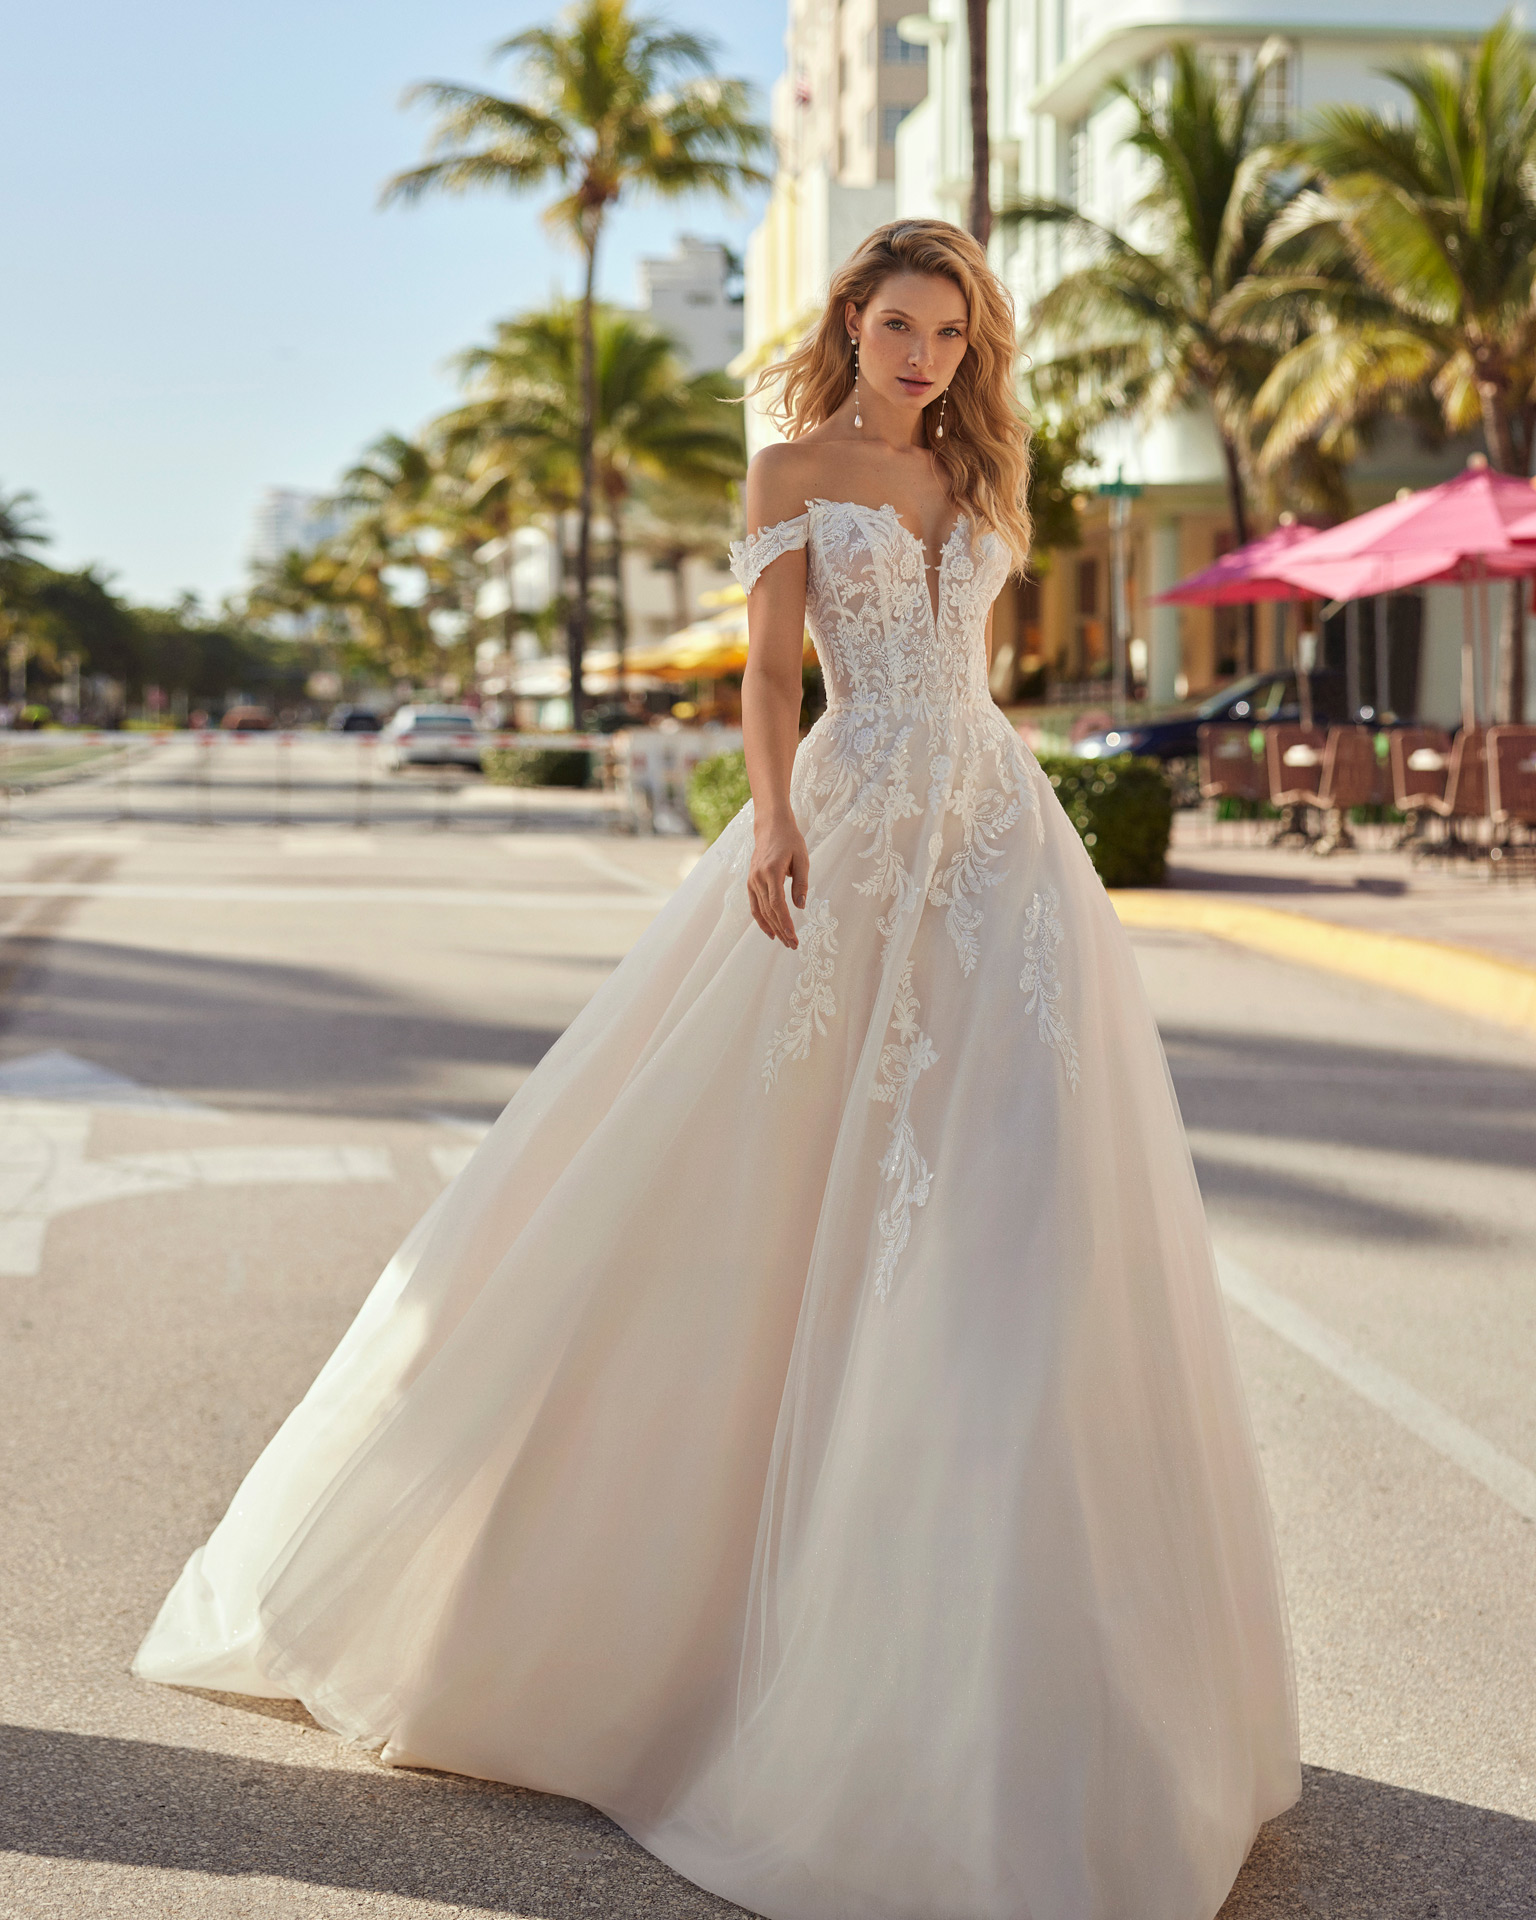 Classic princess wedding dress, made in tulle. This delicate Luna Novias design features a V-neckline, open back, draped straps, and lace bodice with beadwork. LUNA_NOVIAS.